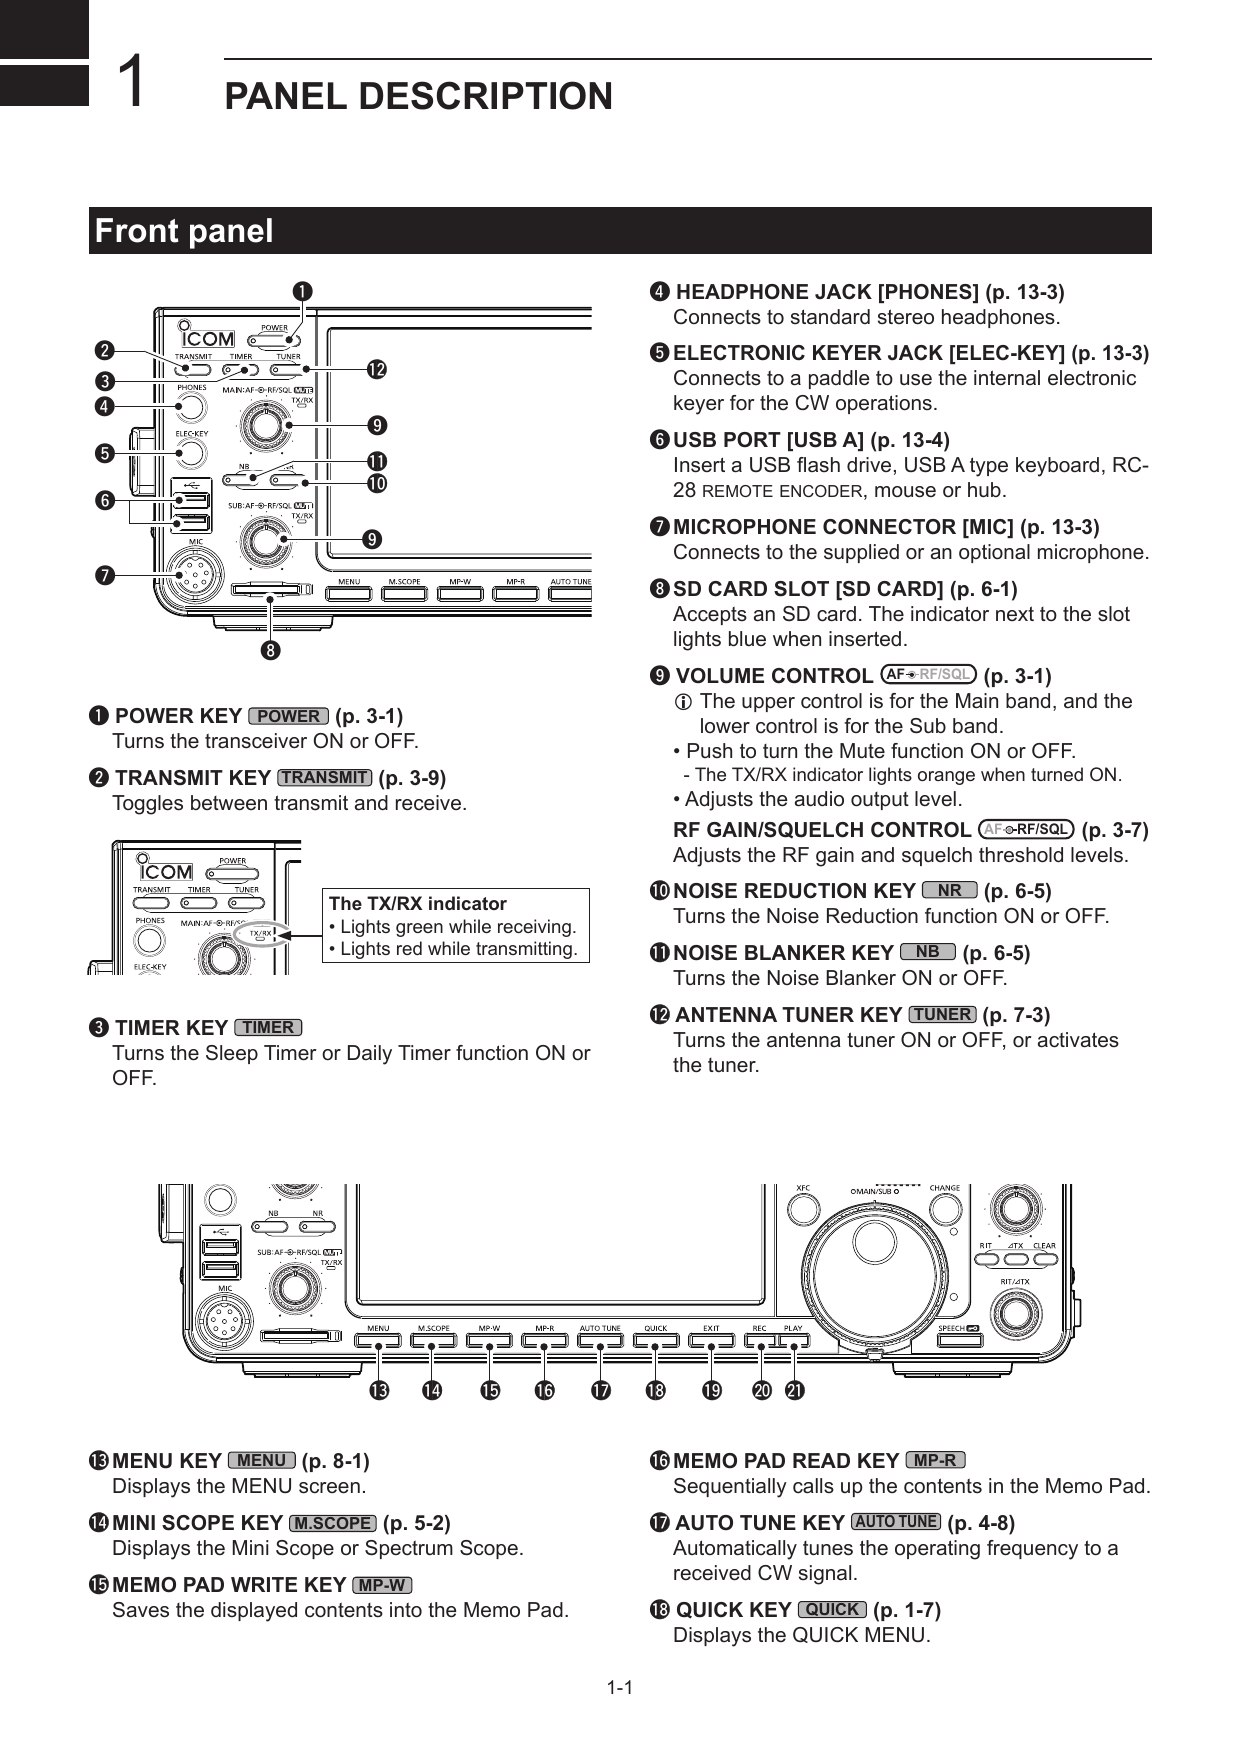 1PANEL DESCRIPTION1-1Front panelq POWER KEY POWER (p. 3-1)  Turns the transceiver ON or OFF.w TRANSMIT KEY TRANSMIT (p. 3-9)   Toggles between transmit and receive.e TIMER KEY TIMER   Turns the Sleep Timer or Daily Timer function ON or OFF.!3 !4 !5 !6 !7 !8 !9 @0 @1rtyu!2o!0wqe!1oir HEADPHONE JACK [PHONES] (p. 13-3)   Connects to standard stereo headphones.t ELECTRONIC KEYER JACK [ELEC-KEY] (p. 13-3)   Connects to a paddle to use the internal electronic keyer for the CW operations.y USB PORT [USB A] (p. 13-4) InsertaUSBashdrive,USBAtypekeyboard,RC-28 remote encoder,mouseorhub.u MICROPHONE CONNECTOR [MIC] (p. 13-3)  Connects to the supplied or an optional microphone.i SD CARD SLOT [SD CARD] (p. 6-1) AcceptsanSDcard.Theindicatornexttotheslotlights blue when inserted.o VOLUME CONTROL AF RF/SQL (p. 3-1)LTheuppercontrolisfortheMainband,andthelower control is for the Sub band.  • Push to turn the Mute function ON or OFF. -TheTX/RXindicatorlightsorangewhenturnedON. •Adjuststheaudiooutputlevel.    RF  GAIN/SQUELCH  CONTROL AF RF/SQL (p. 3-7) AdjuststheRFgainandsquelchthresholdlevels.!0 NOISE REDUCTION KEY NR (p. 6-5) TurnstheNoiseReductionfunctionONorOFF.!1 NOISE BLANKER KEY NB (p. 6-5)   Turns the Noise Blanker ON or OFF.!2 ANTENNA TUNER KEY TUNER (p. 7-3) TurnstheantennatunerONorOFF,oractivatesthe tuner.The TX/RX indicator  •  Lights green while receiving. •  Lights red while transmitting.!3 MENU  KEY MENU (p. 8-1)  Displays the MENU screen.!4 MINI SCOPE KEY M.SCOPE (p. 5-2)  Displays the Mini Scope or Spectrum Scope.!5 MEMO PAD WRITE KEY MP-W   Saves the displayed contents into the Memo Pad.!6 MEMO PAD READ KEY MP-R SequentiallycallsupthecontentsintheMemoPad.!7 AUTO TUNE KEY AUTO TUNE (p. 4-8) Automaticallytunestheoperatingfrequencytoareceived CW signal.!8 QUICK KEY QUICK (p. 1-7)  Displays the QUICK MENU.